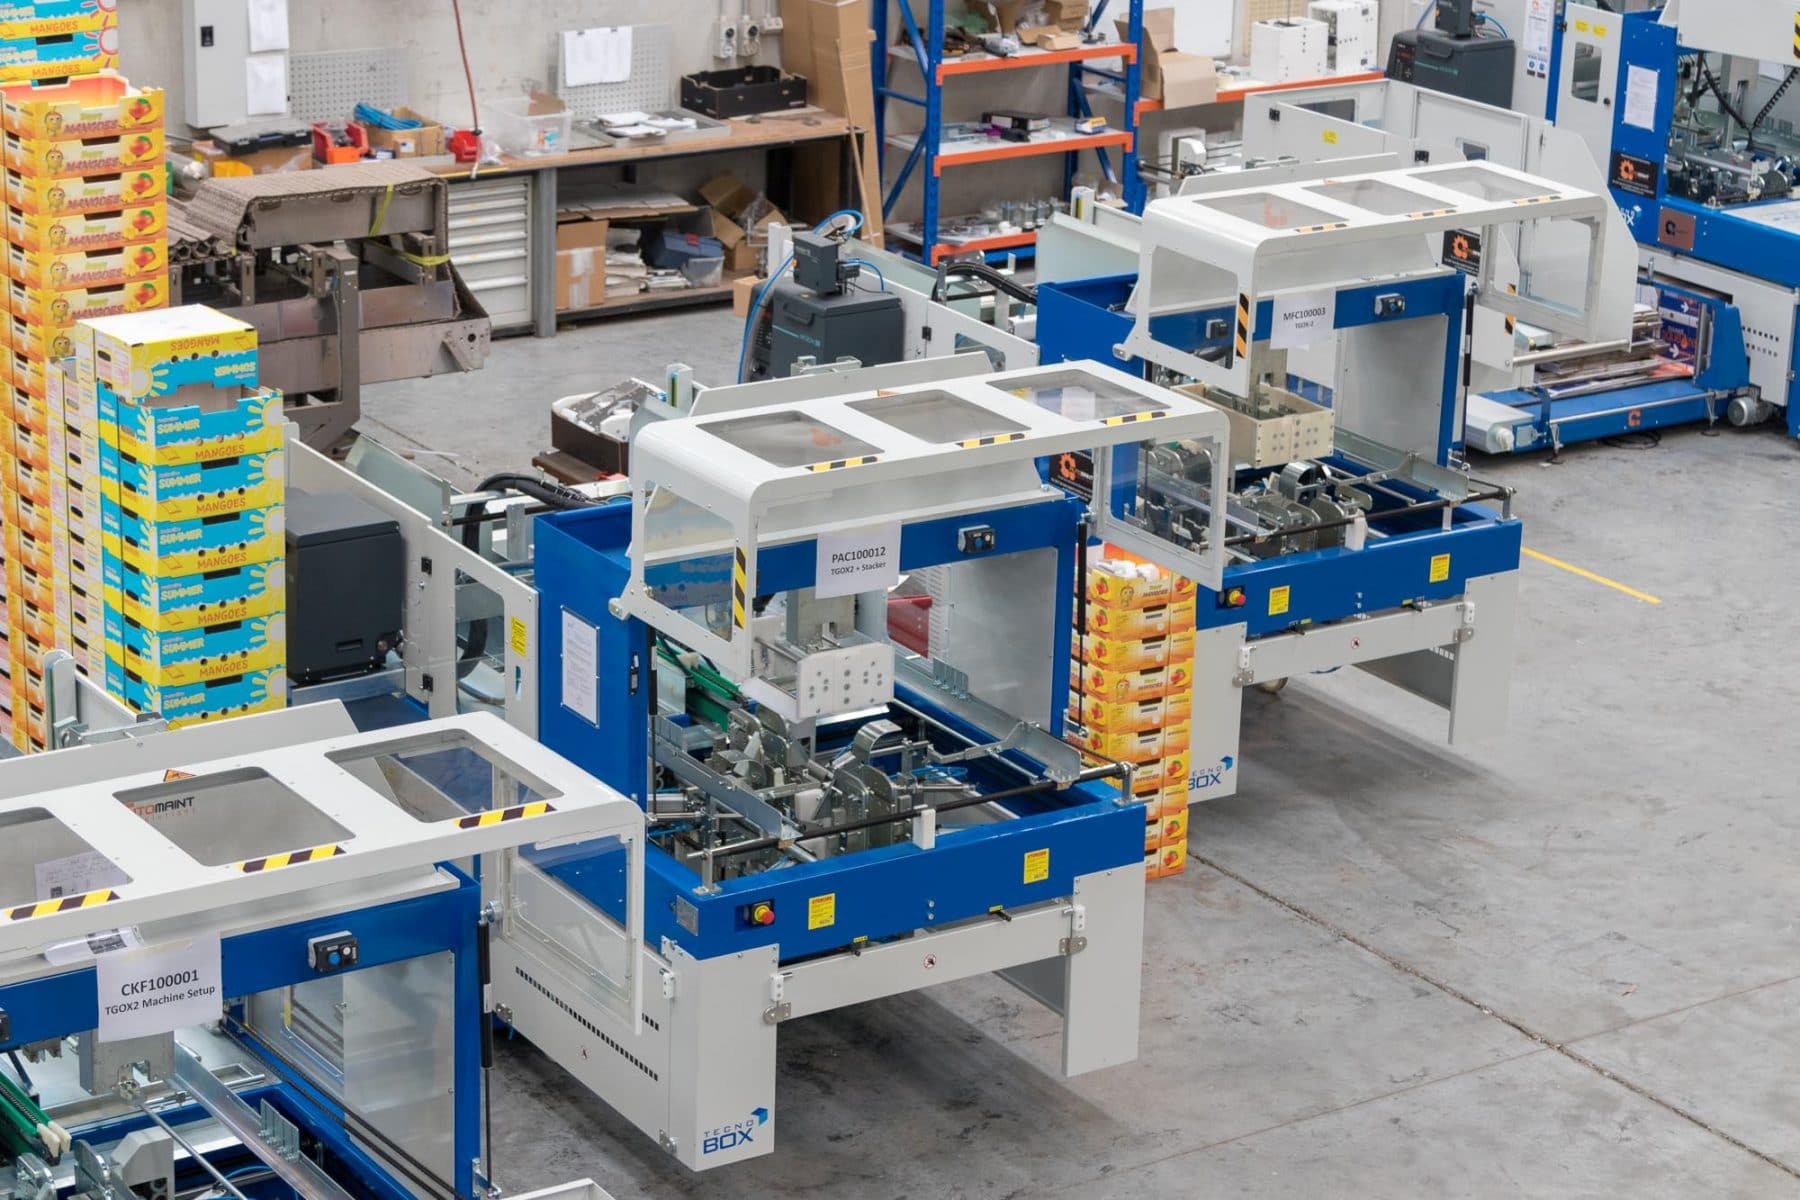 Automaint Solutions - Tecnobox Tray Erectors in our workshop